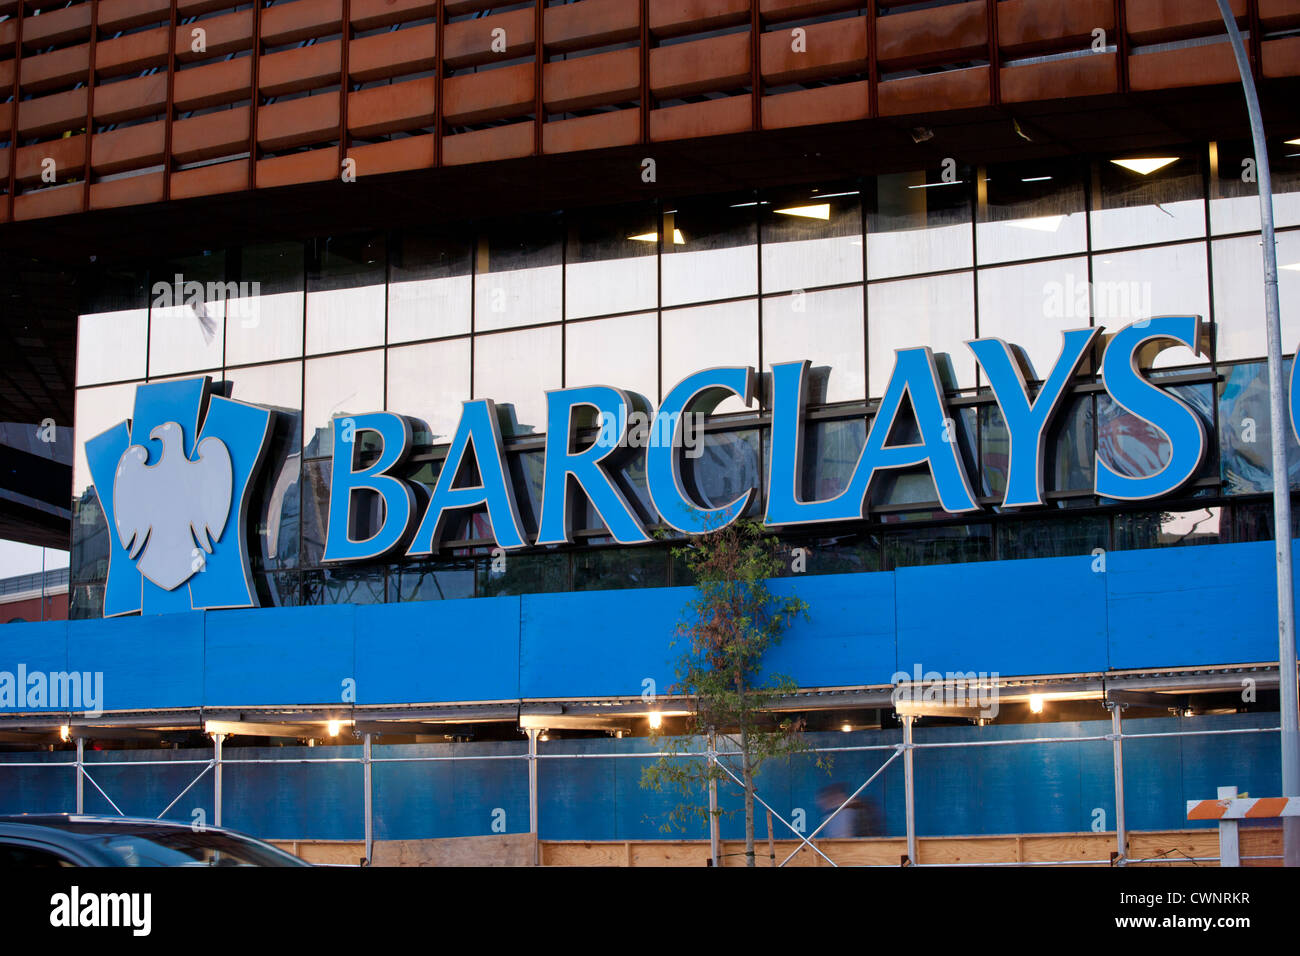 The Barclays Center home of the Brooklyn Nets Sports Arena and Concert Hall, Brooklyn, NY, USA Stock Photo